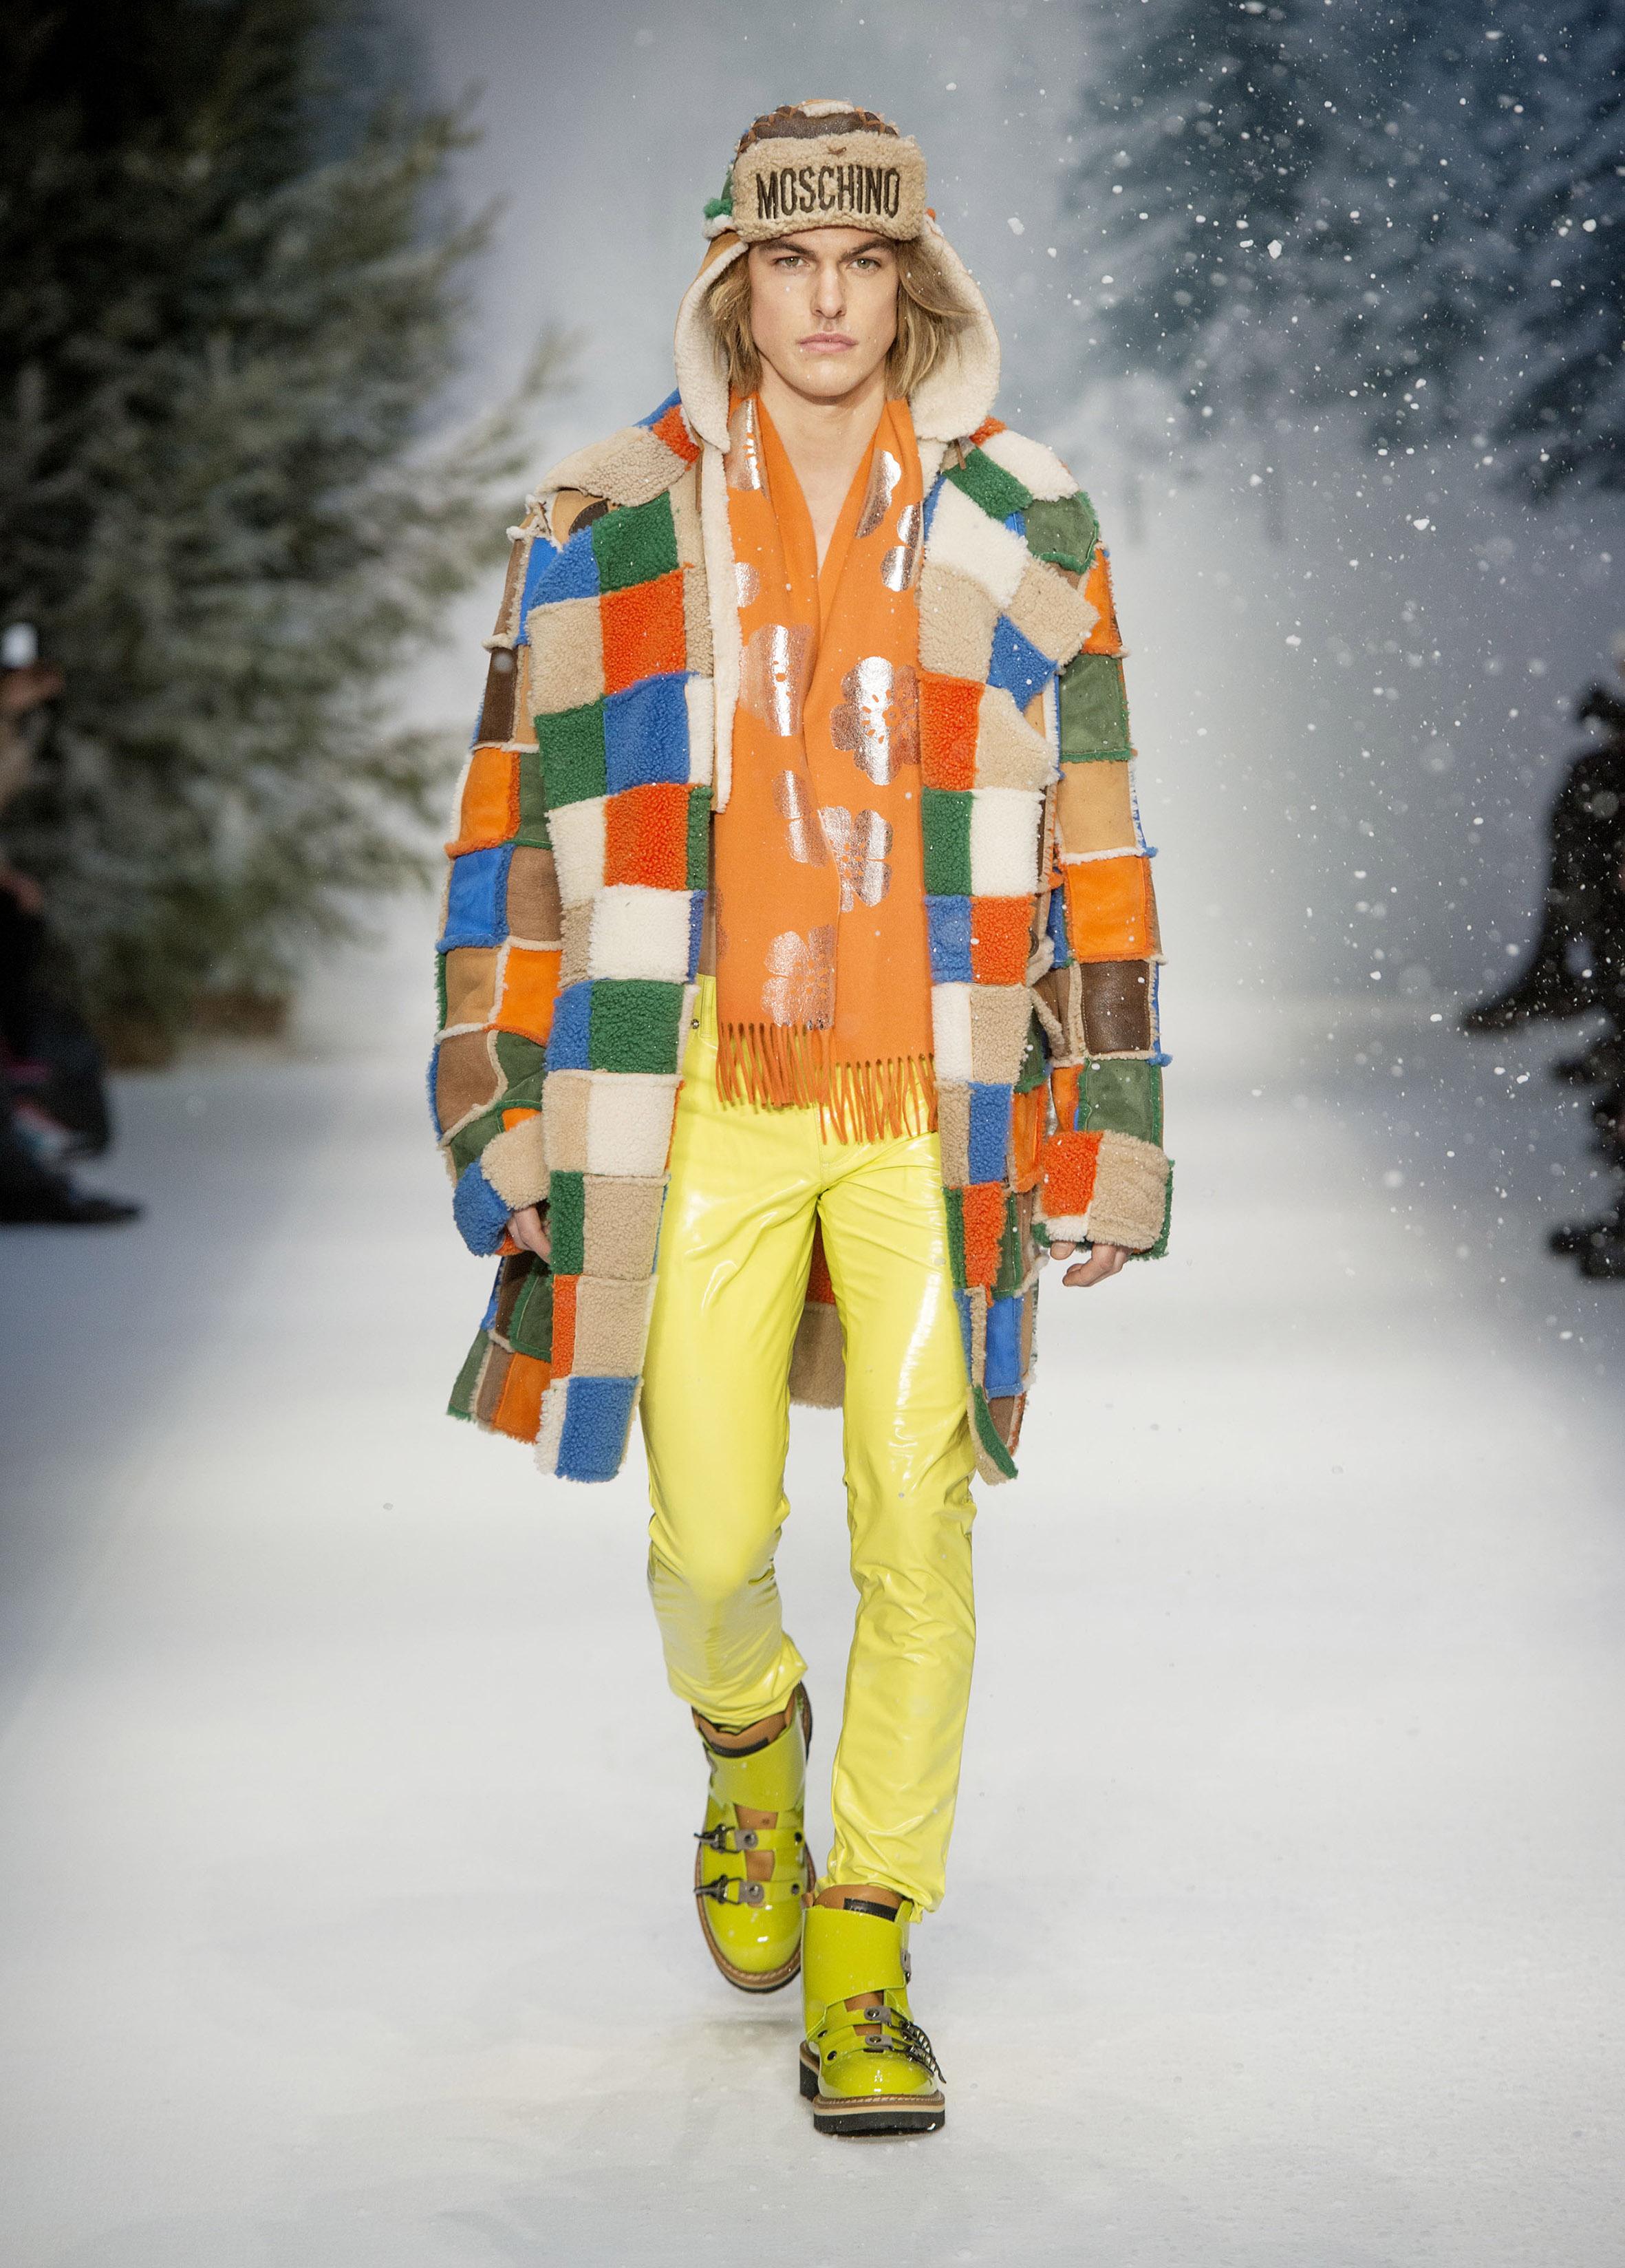 moschino-mode-homme-automne-hiver-2015-london-collection-men